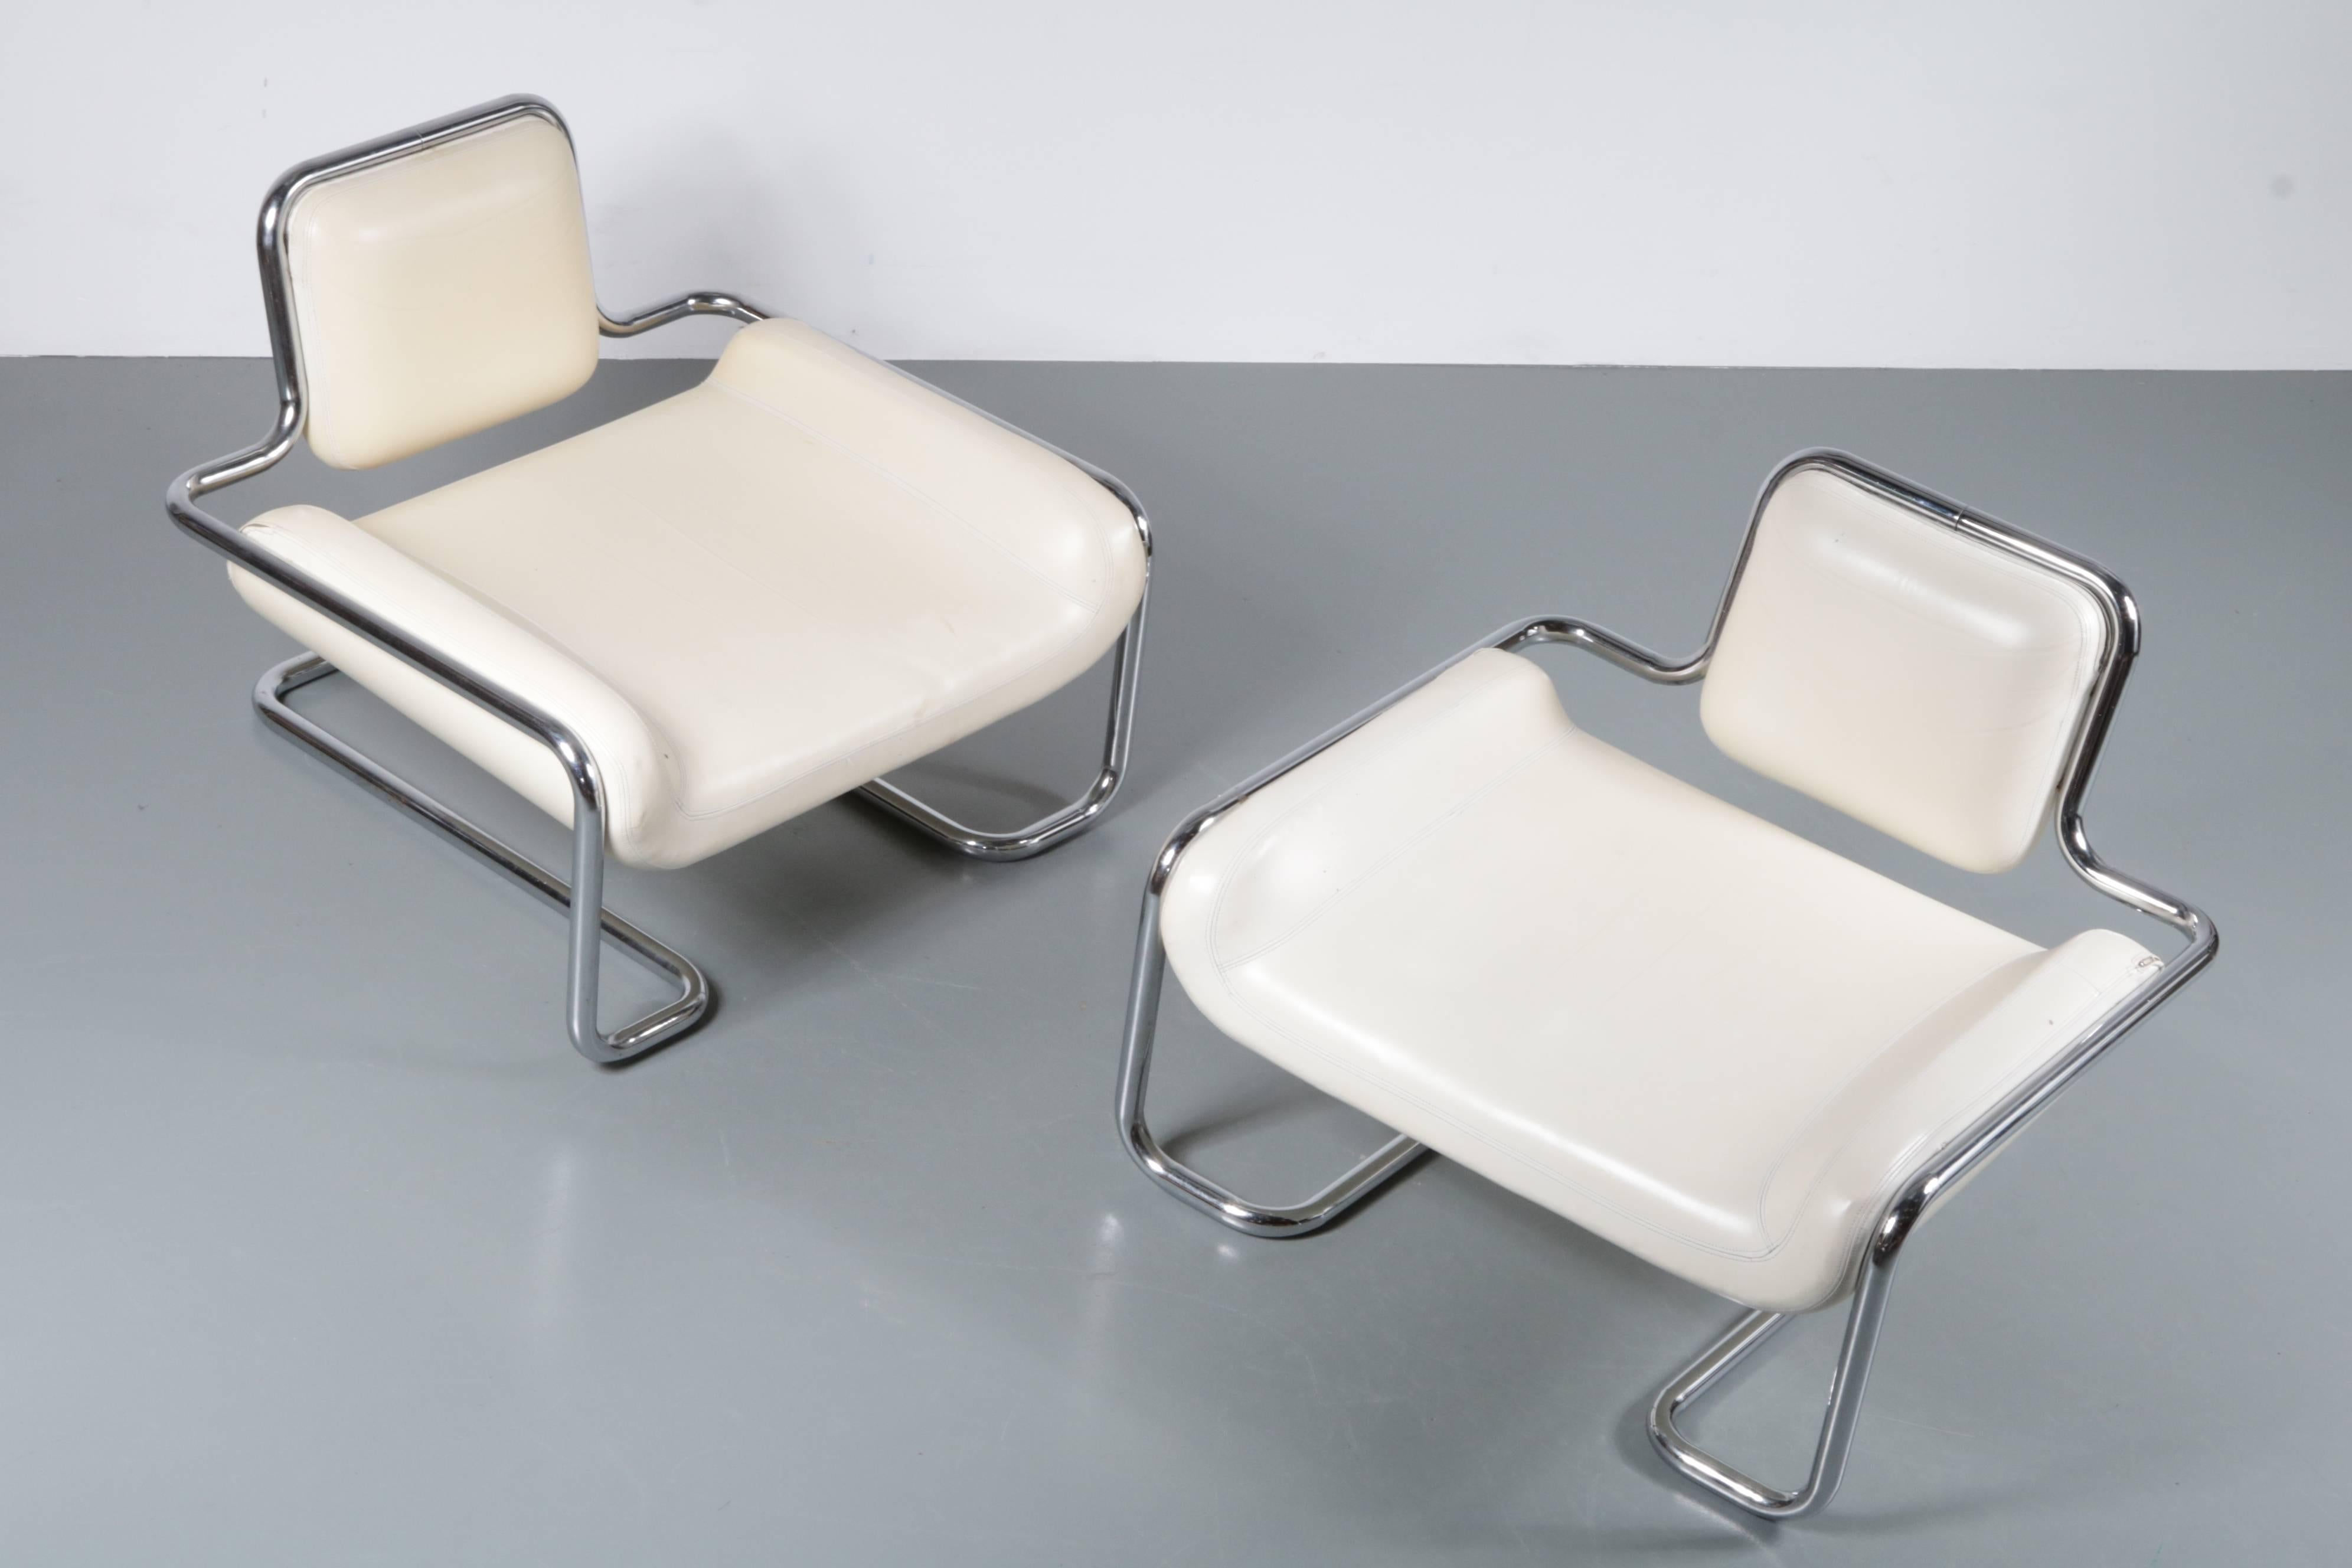 An eye-catching pair of Limande Chairs designed by Kwok Hoï Chan, manufactured by Steiner, France in 1971.

These beautiful chairs have a smooth design with a high quality chrome plated one-piece tubular frame. They are completely original and have